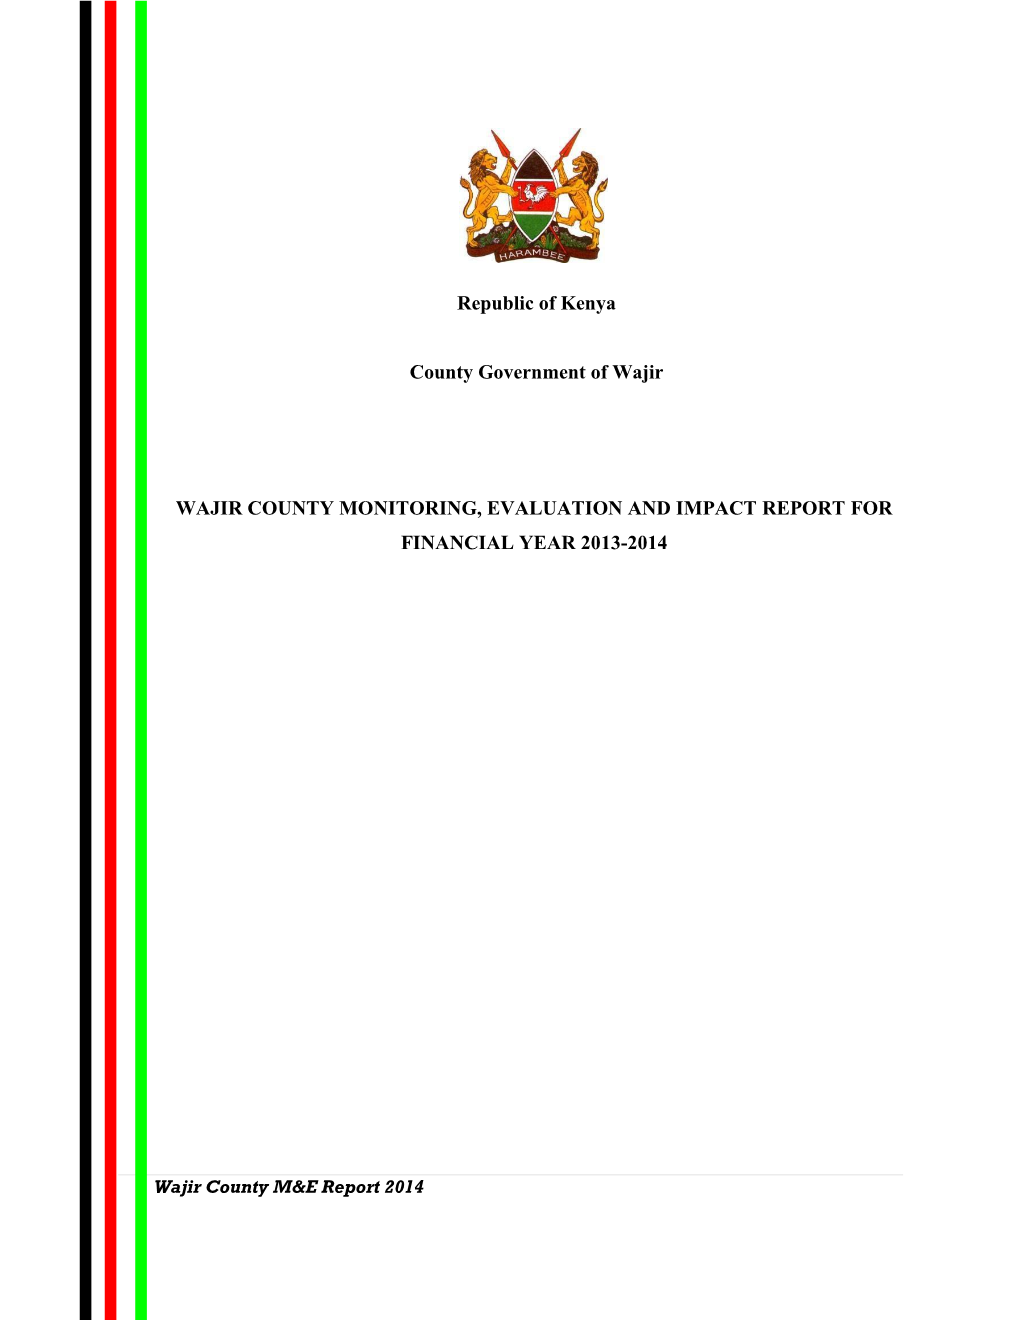 County Monitoring, Evaluation and Impact Report for Financial Year 2013-2014